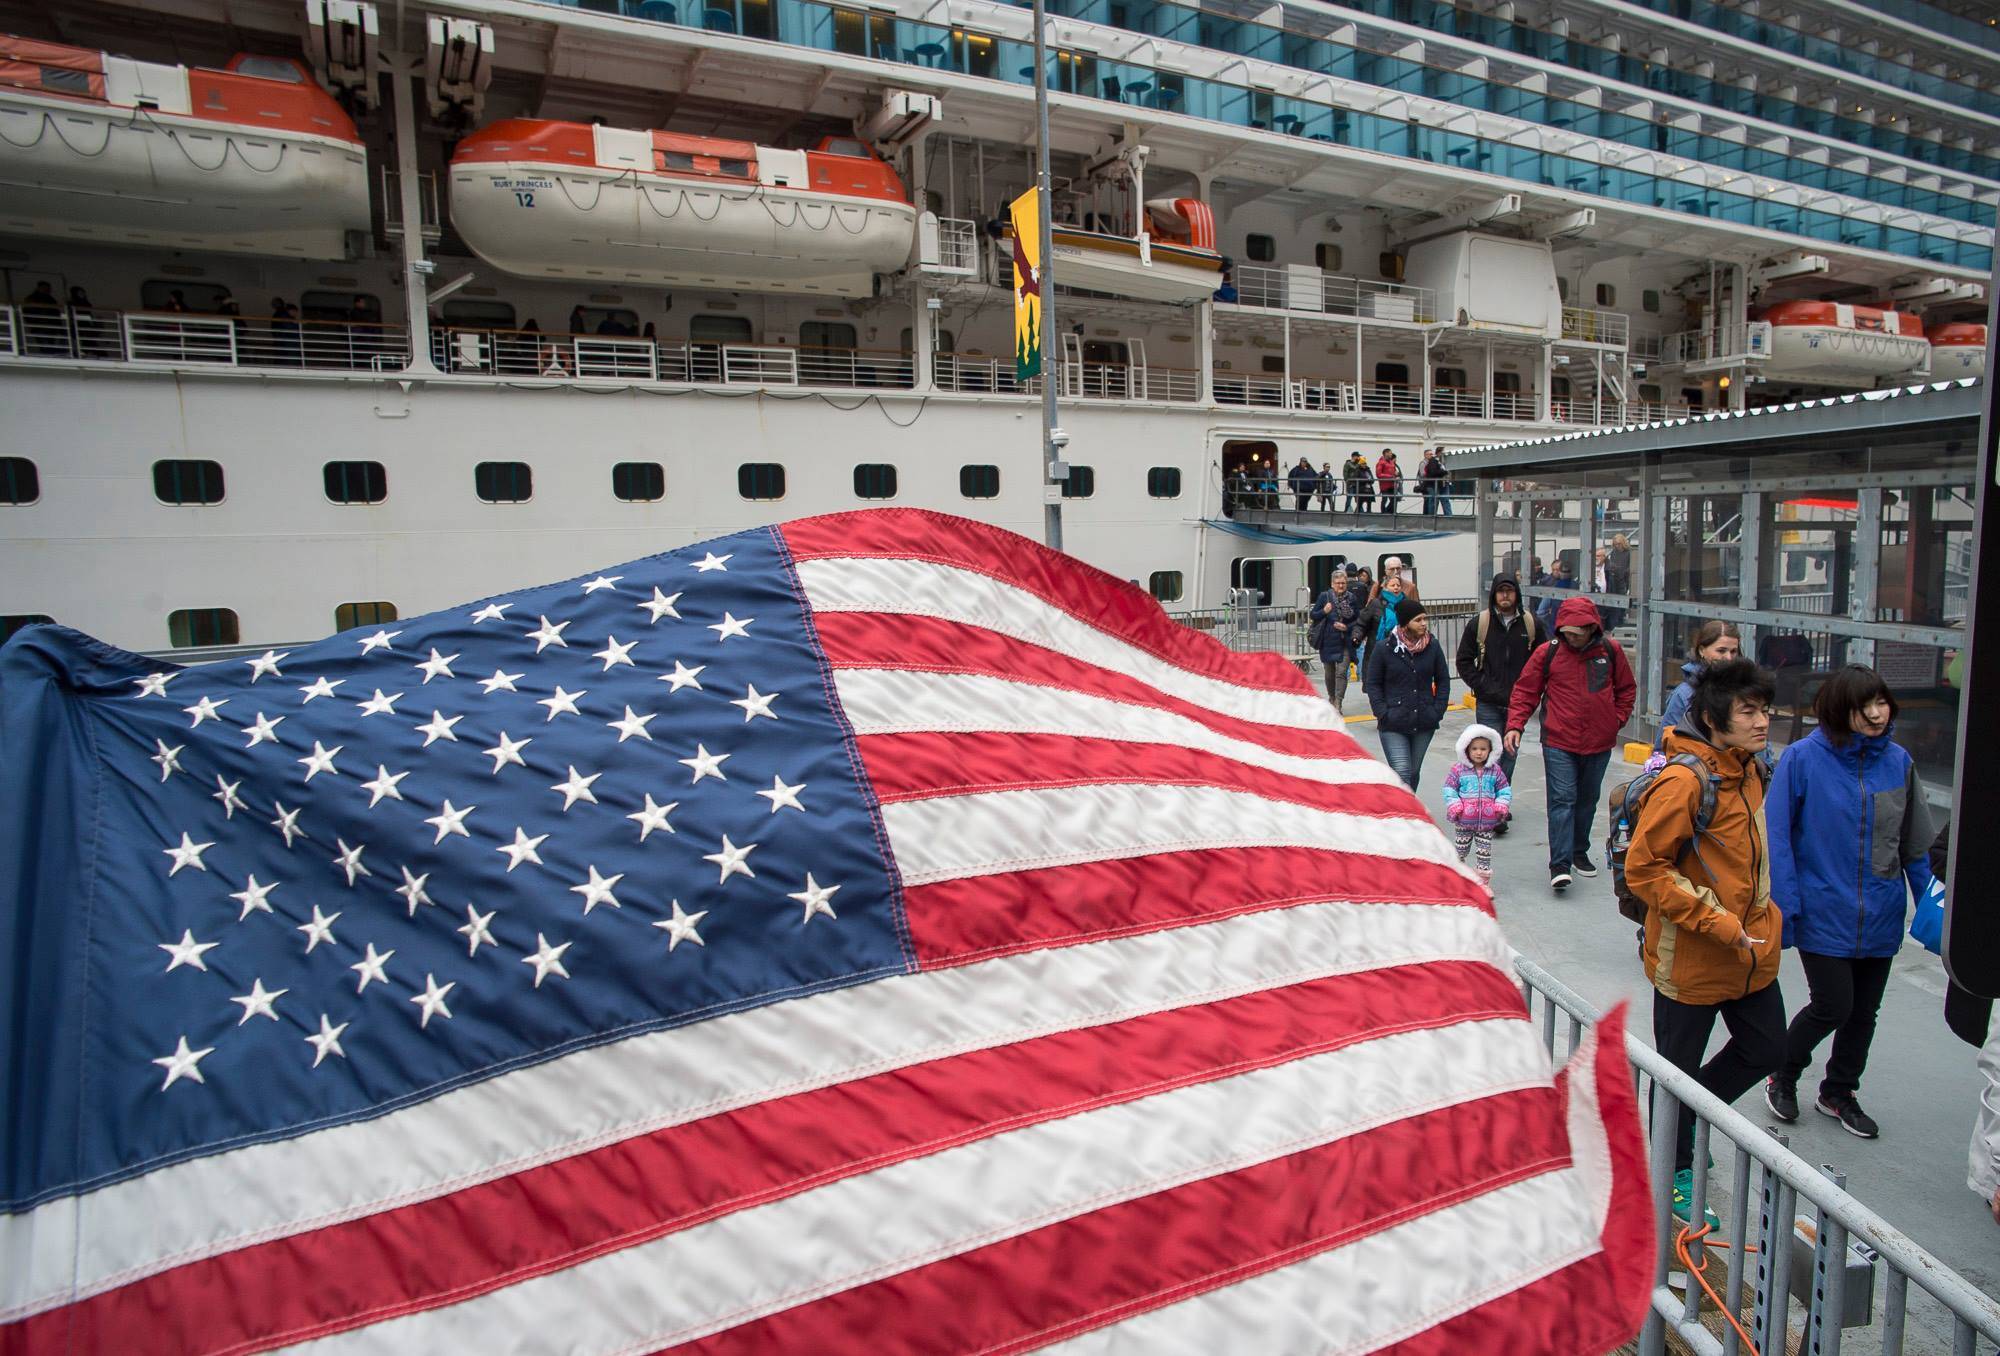 The first cruise ship of the season, the Ruby Princess, arrives in Juneau on Monday. (Michael Penn | Juneau Empire)